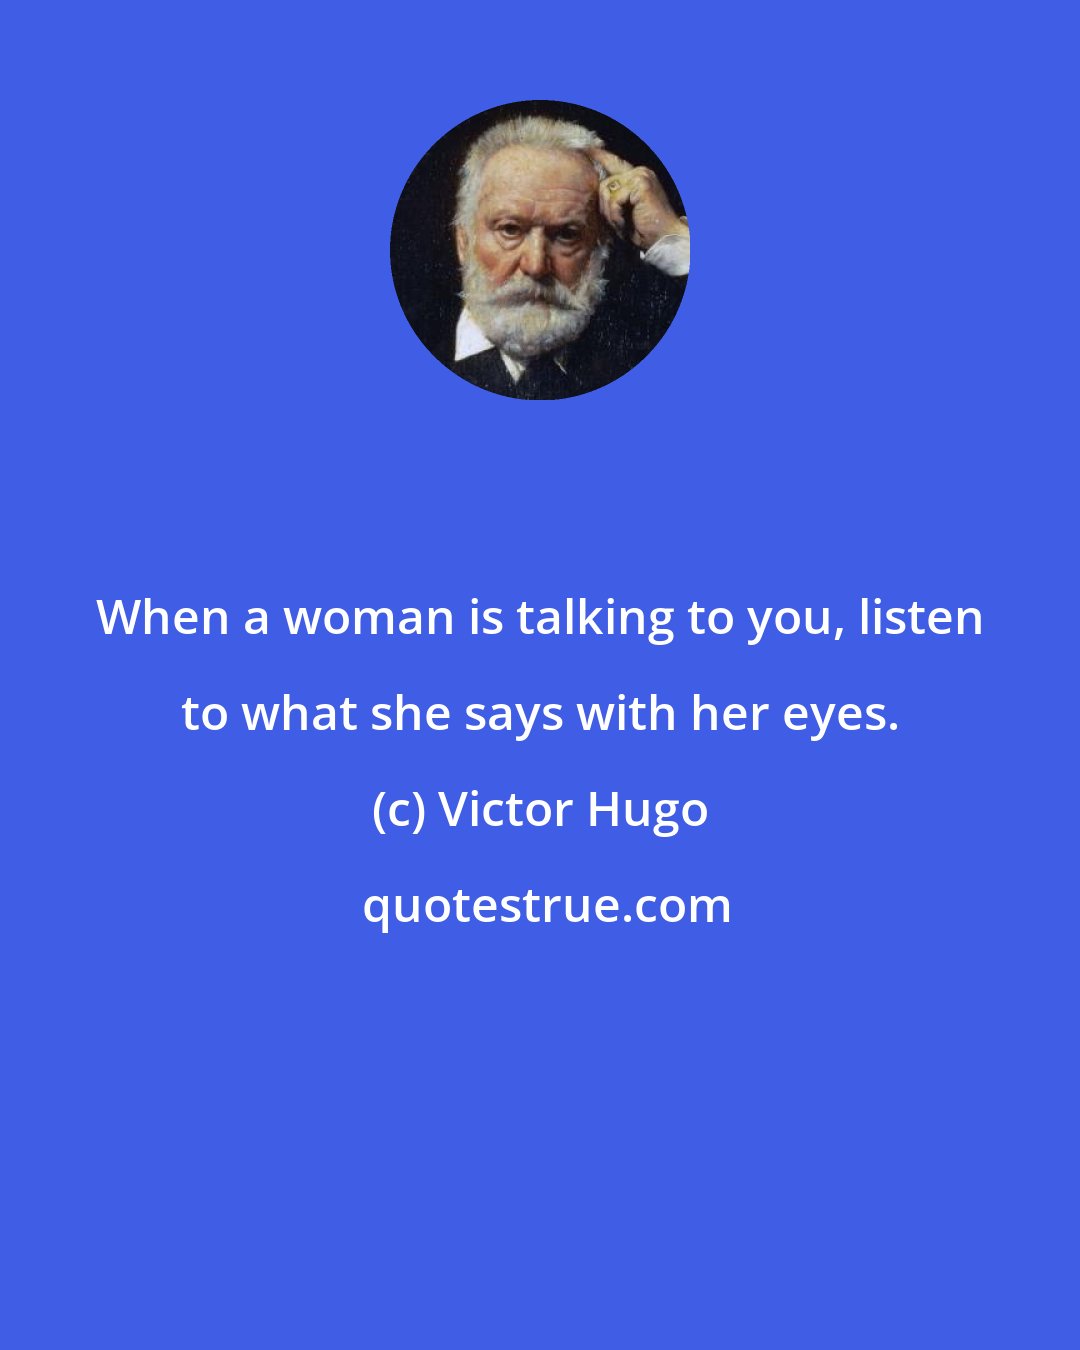 Victor Hugo: When a woman is talking to you, listen to what she says with her eyes.